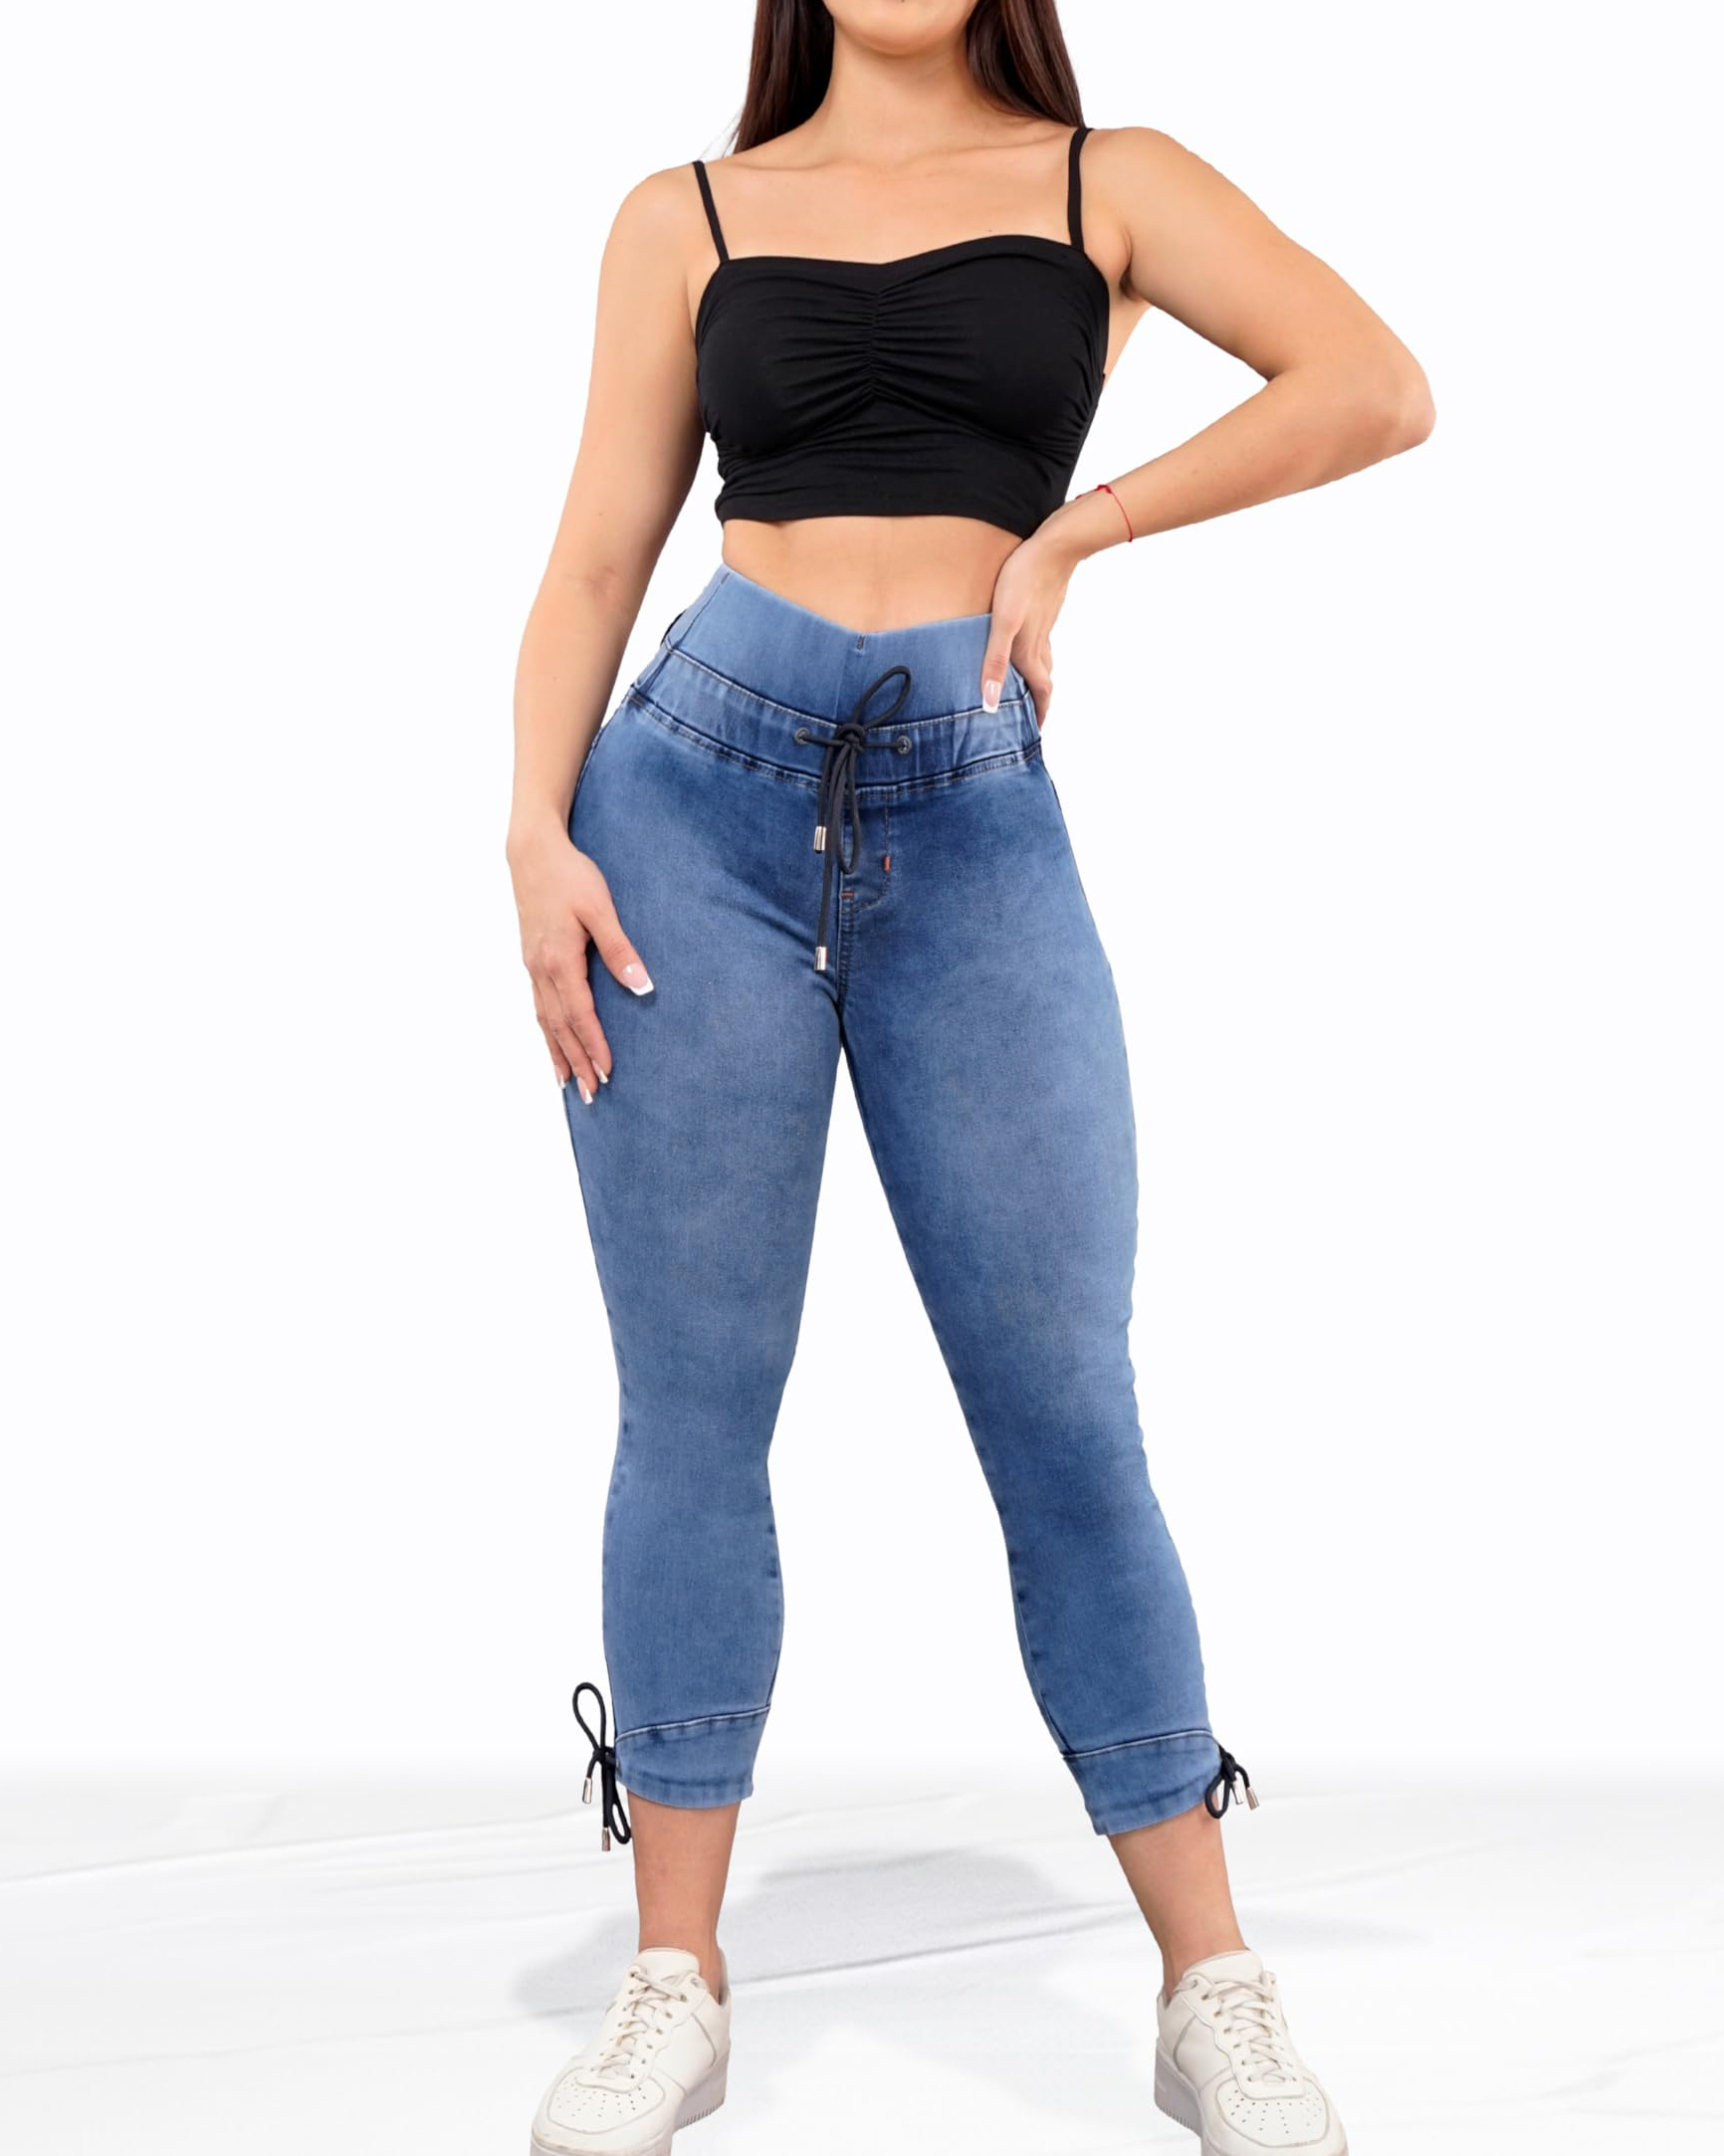 Levanta cola High Waisted Butt Lifting Jeans for Women